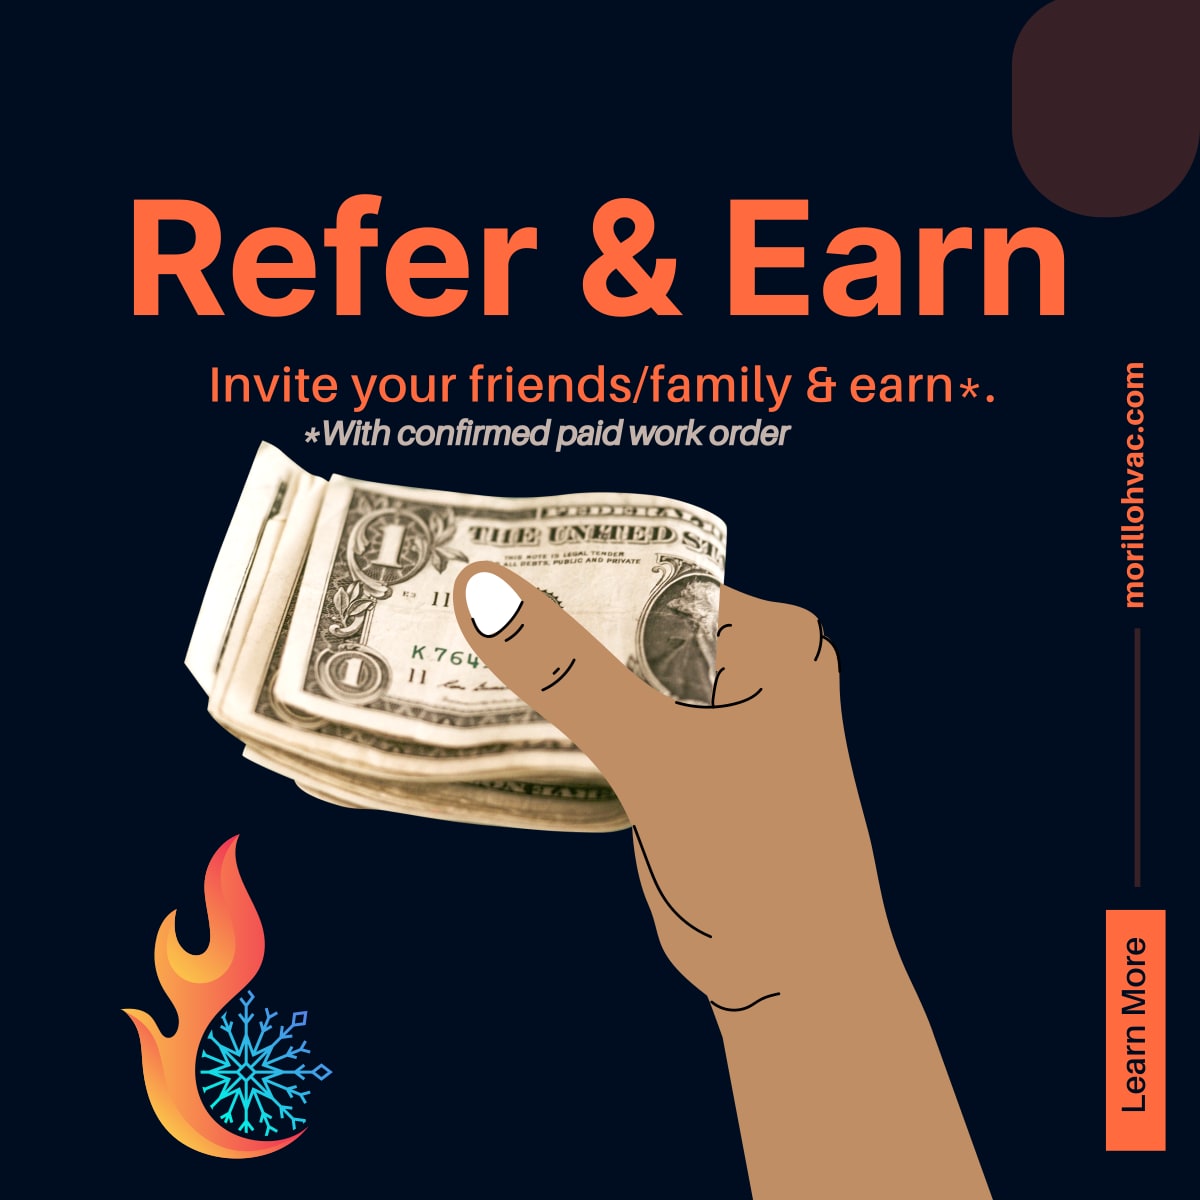 special refer and earn; invite your friends or family and earn with a confirmed paid work order